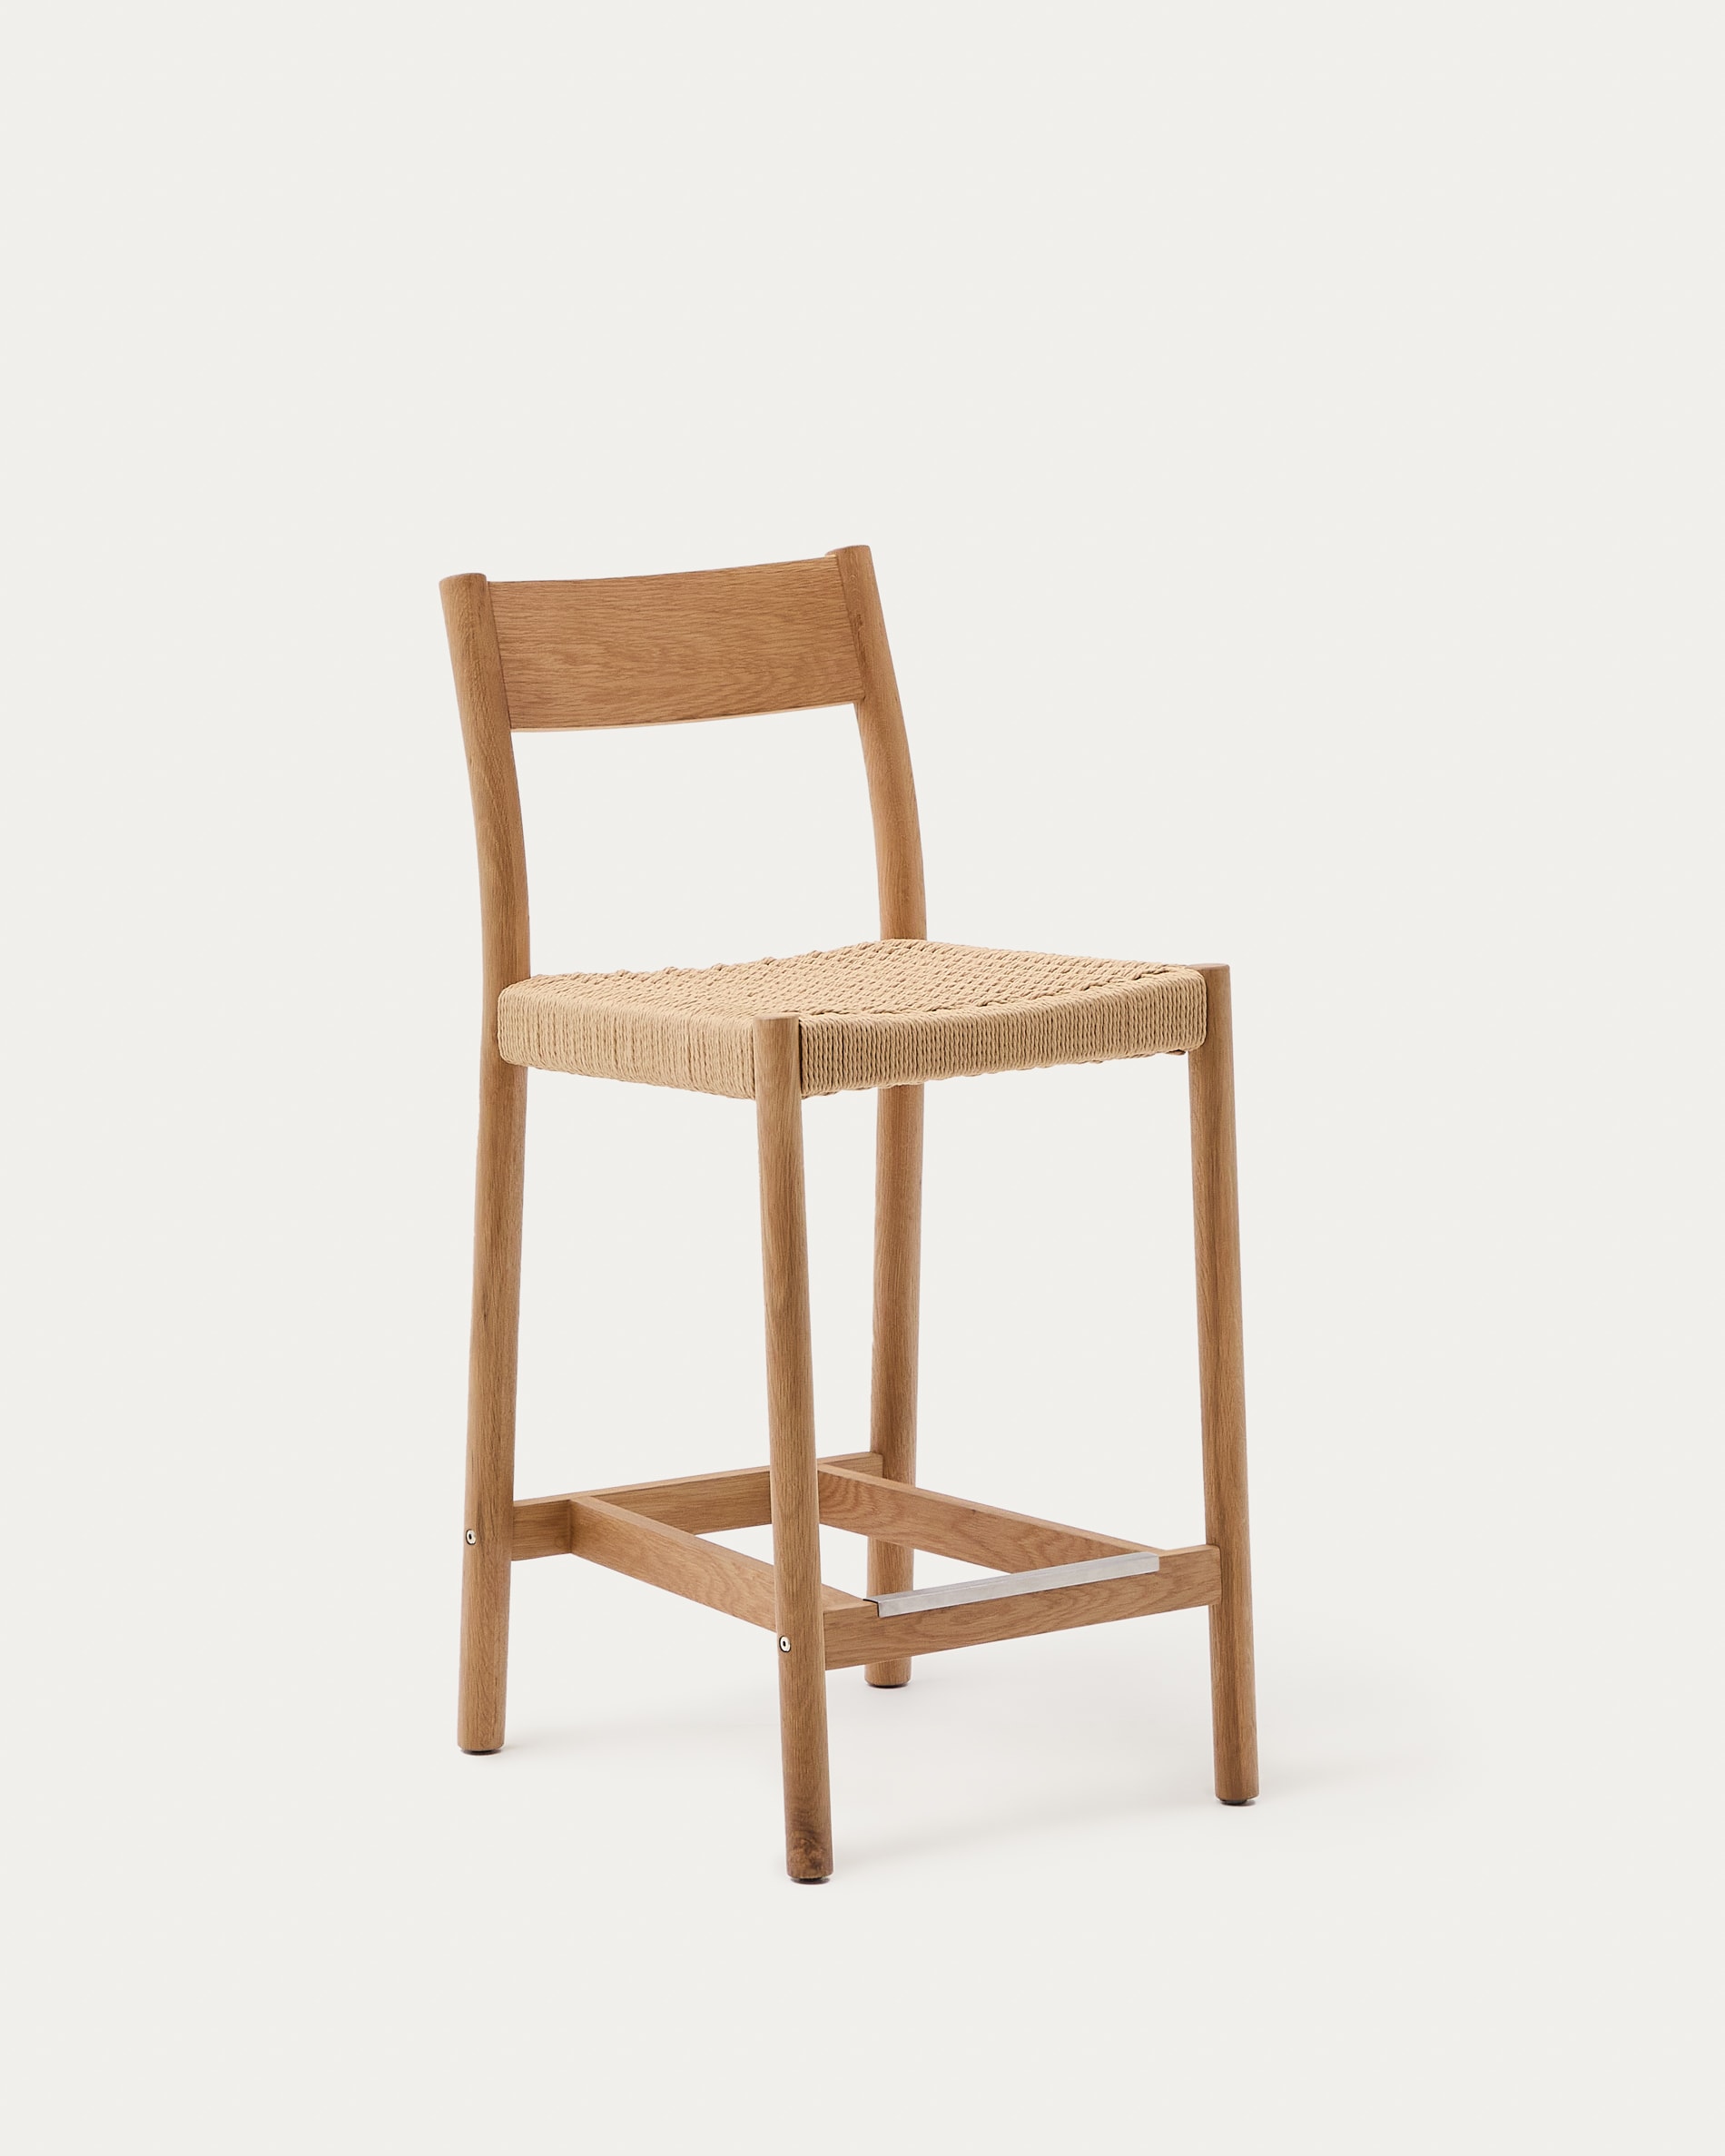 Yalia stool with a backrest in solid oak wood in a natural finish, and rope cord seat, 65 cm 100% FSC